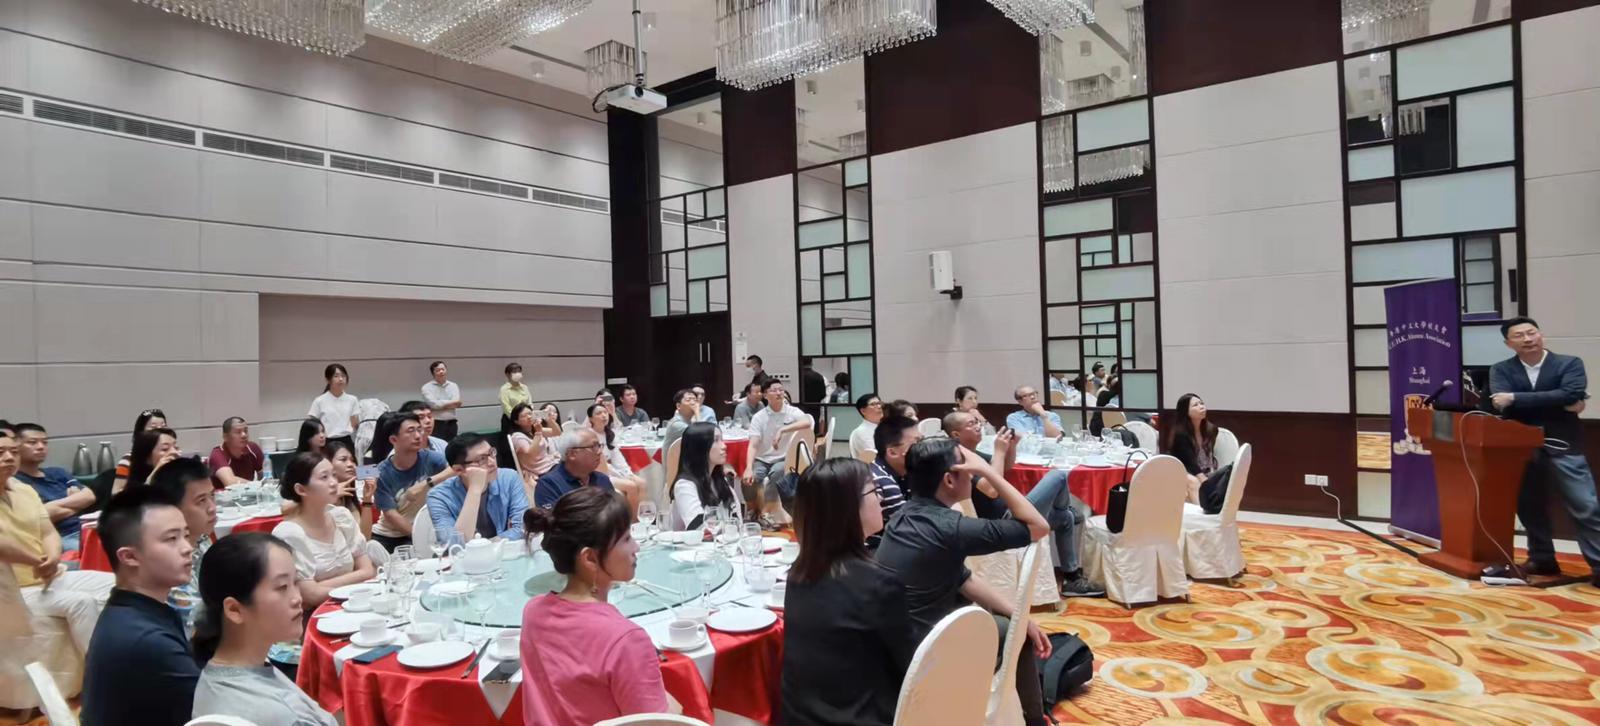 Annual General Meeting and Gala Dinner in April 2019